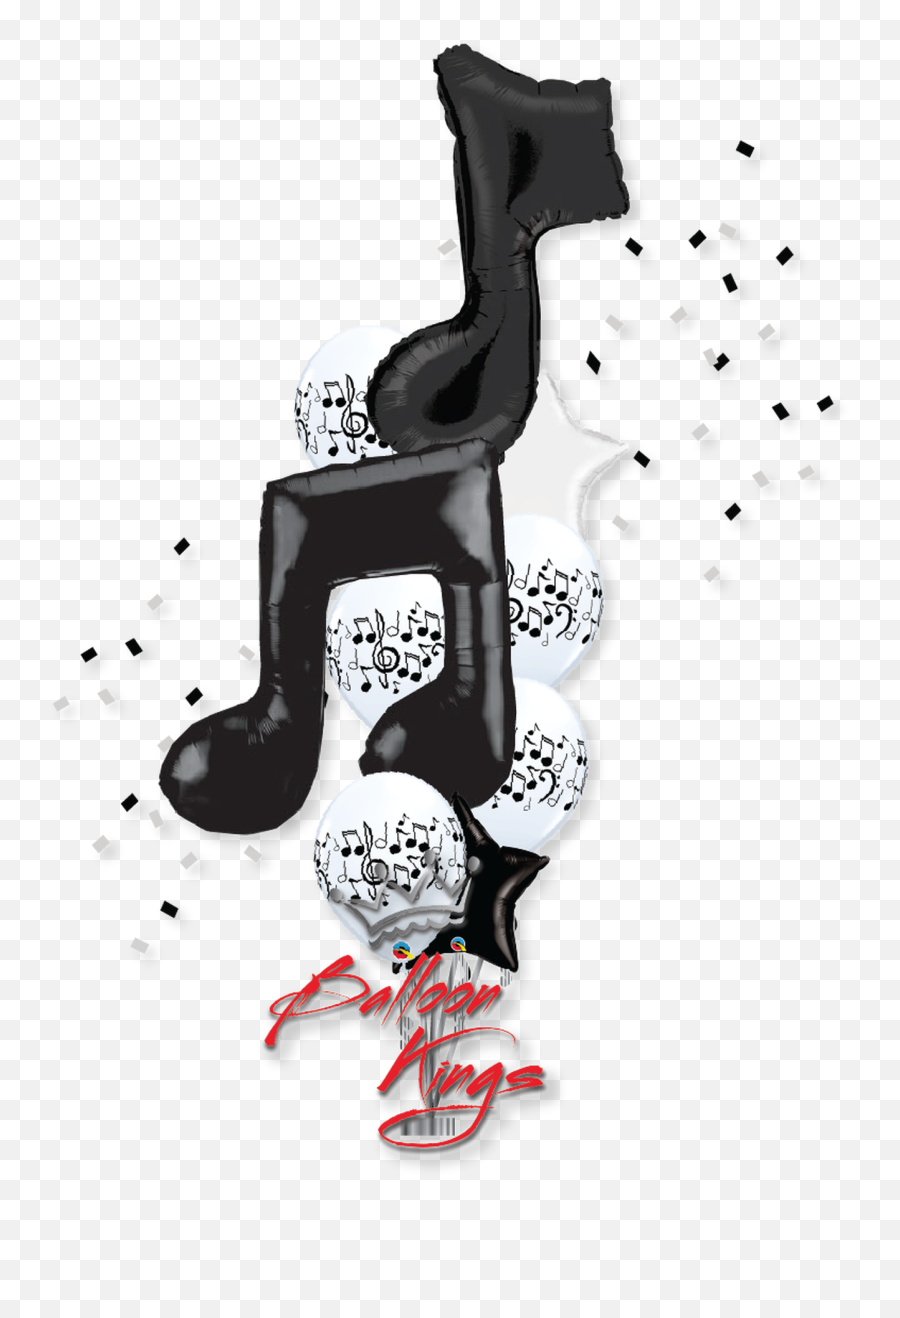 Music Notes Bouquet Emoji,Note 4 Emojis For Email